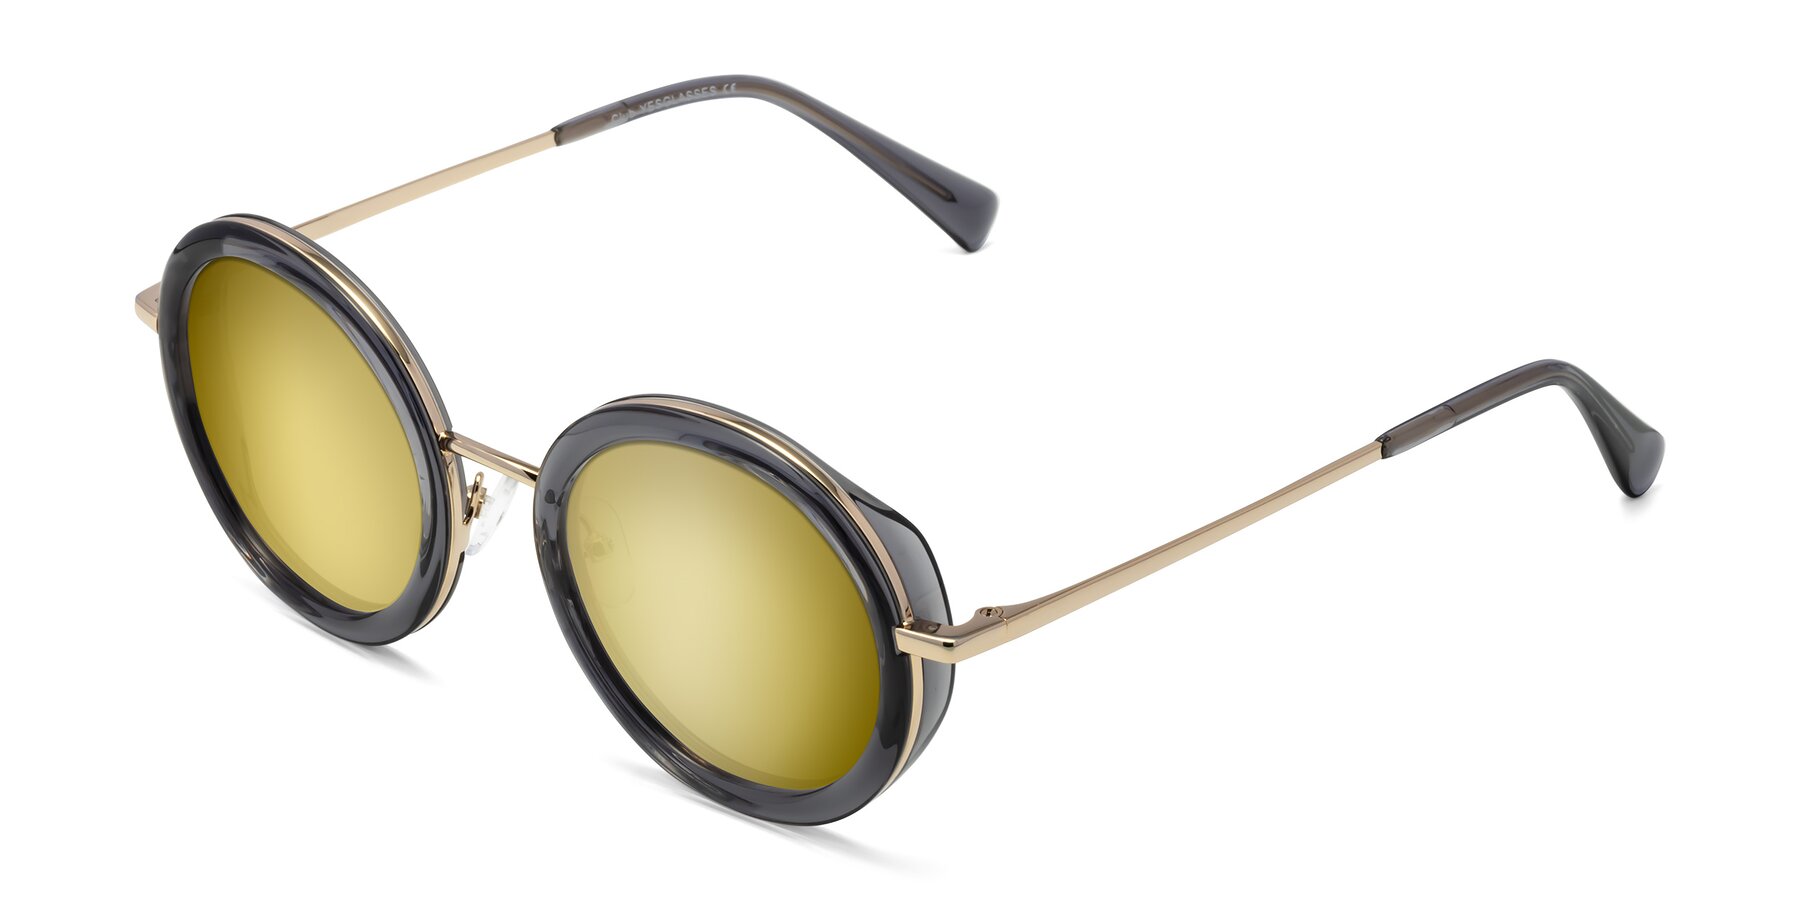 Angle of Club in Gray-Gold with Gold Mirrored Lenses